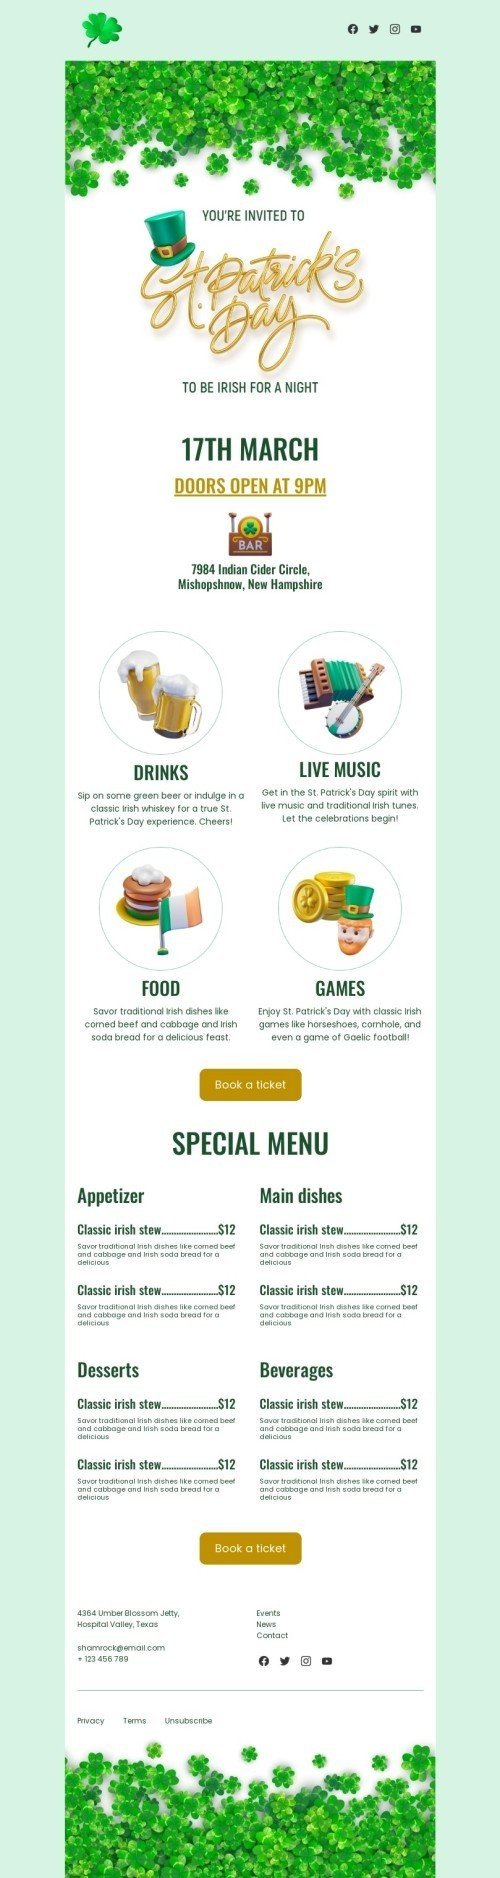 St. Patrick’s Day Email Template "To be irish for a night" for Restaurants industry desktop view